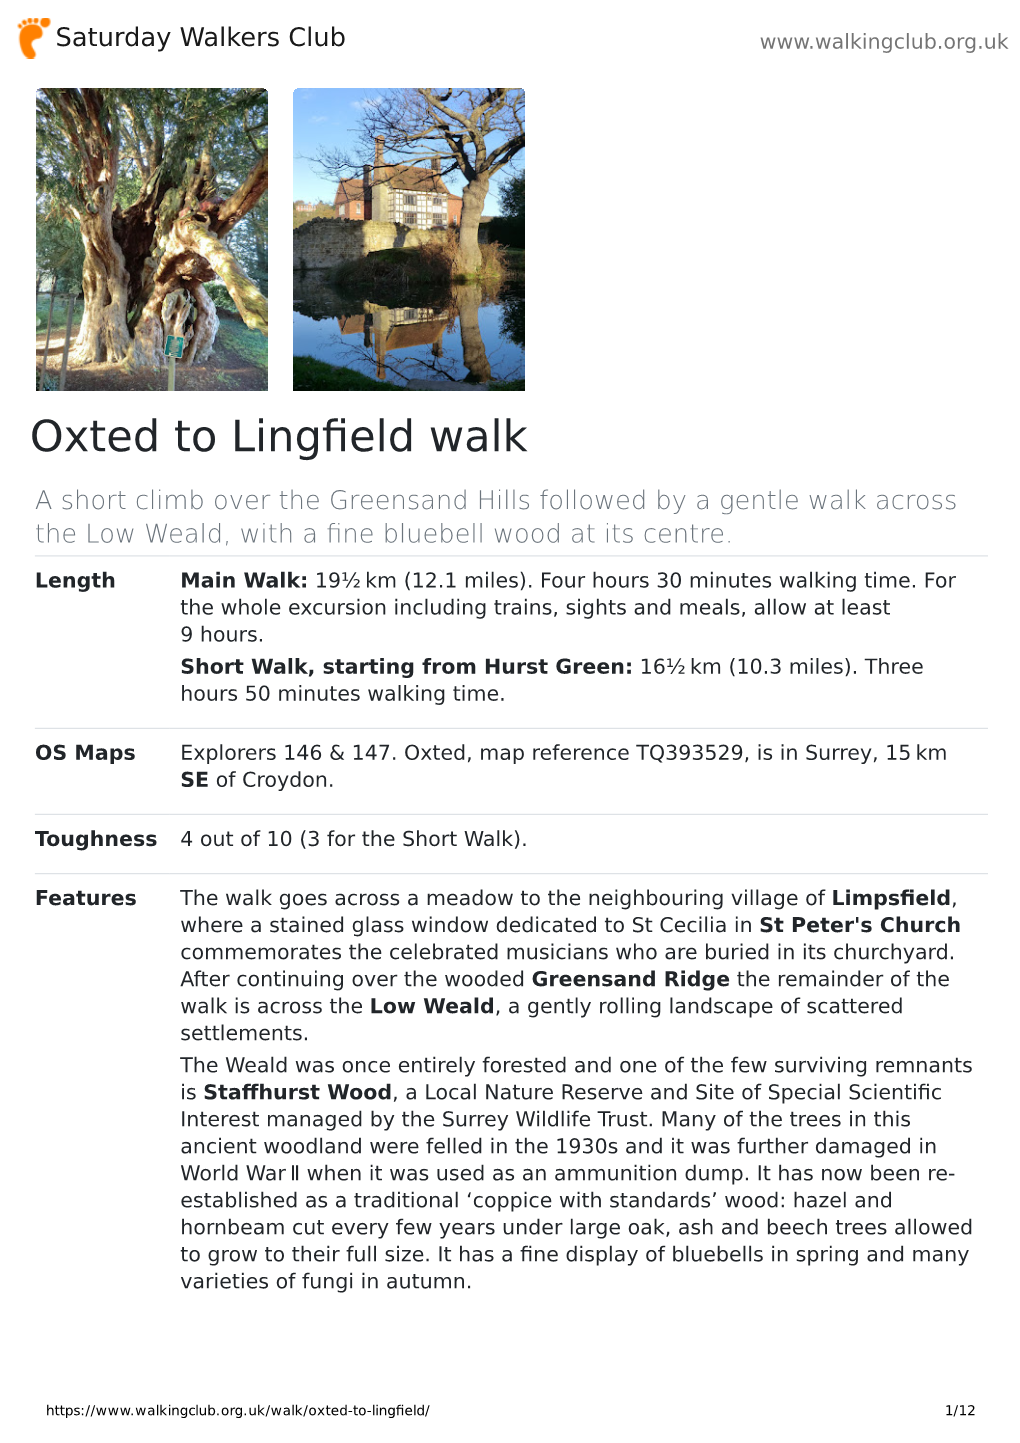 Oxted to Lingfield Walk